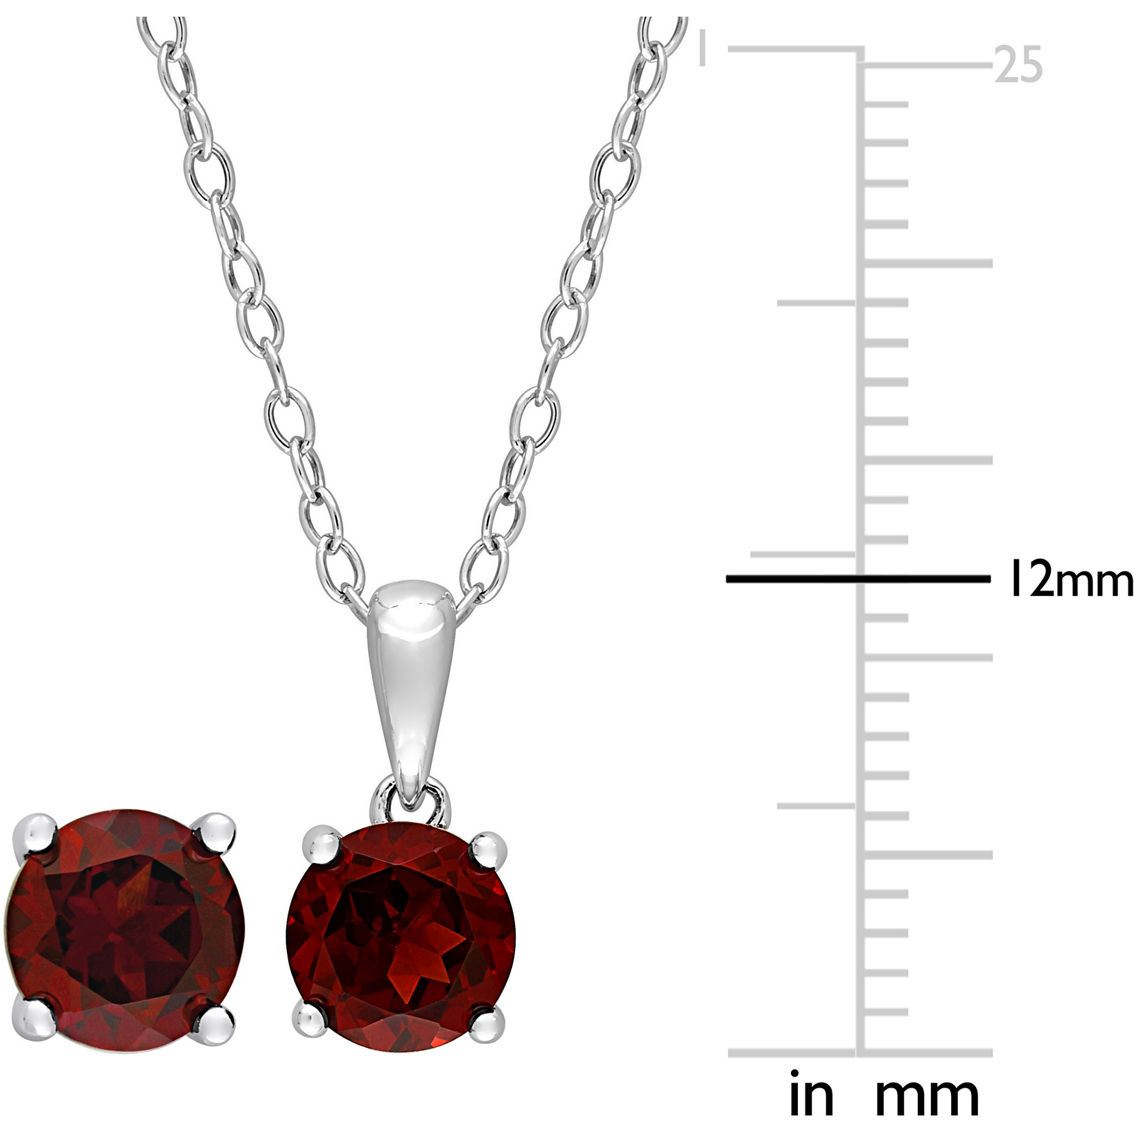 Sofia B. Sterling Silver  Garnet Solitaire Necklace and Stud Earrings Set - Image 4 of 4